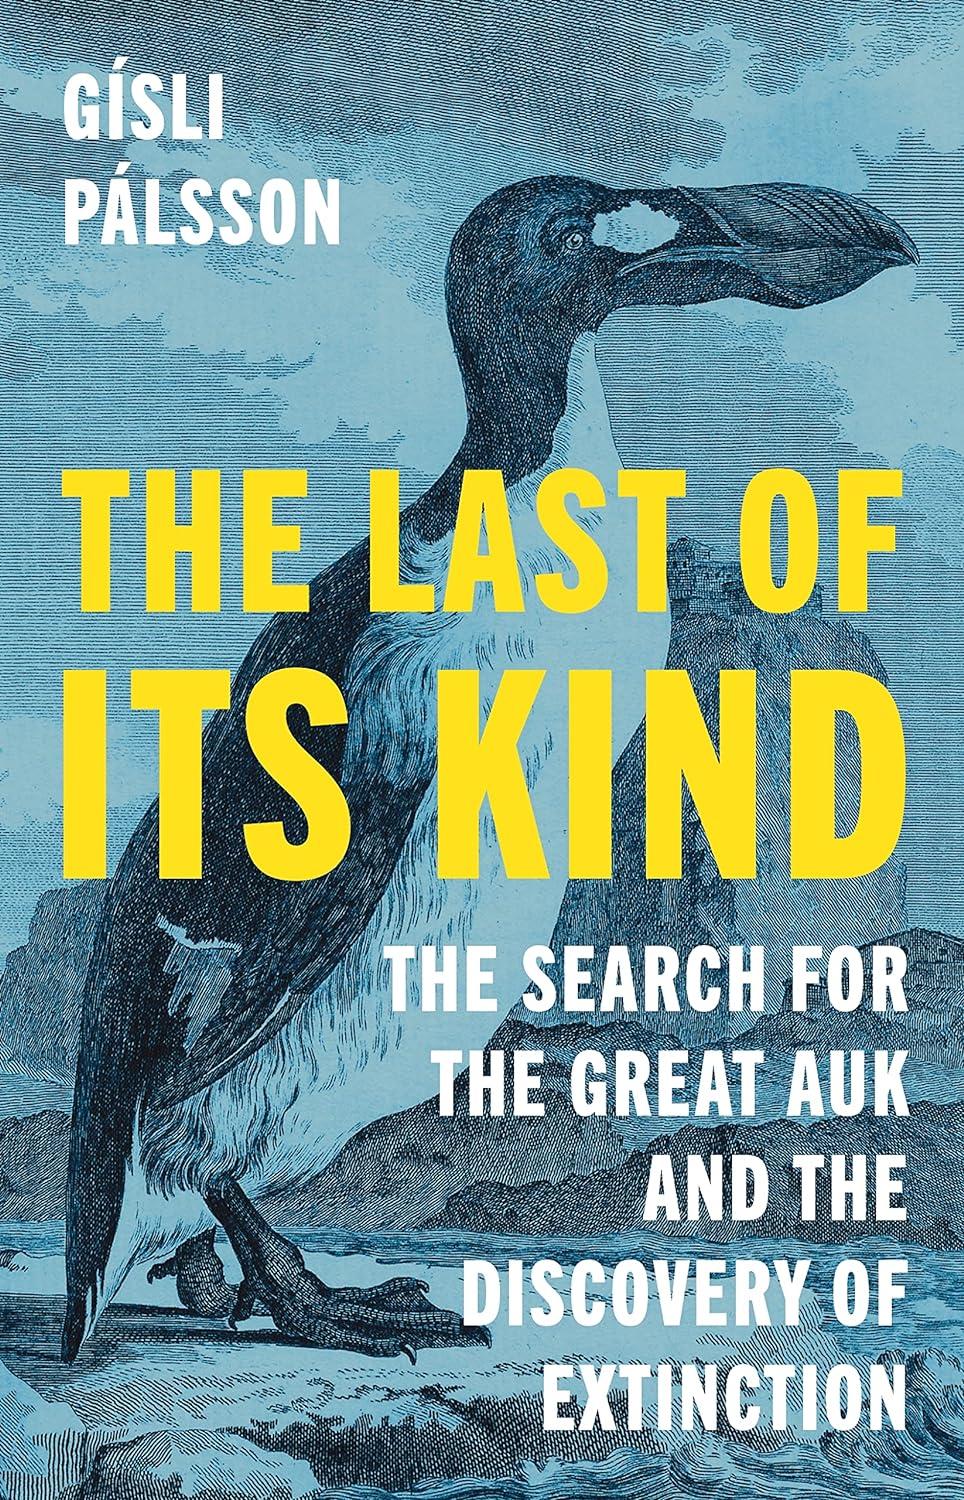 "The Last of Its Kind: The Search for the Great Auk and the Discovery of Extinction," by <span class="a-truncate" data-a-word-break="normal" data-a-max-rows="2" data-a-overflow-marker="&hellip;" data-a-recalculate="false" data-a-updated="true"><span class="a-truncate-full a-offscreen">Gisli Palsson. </span></span>